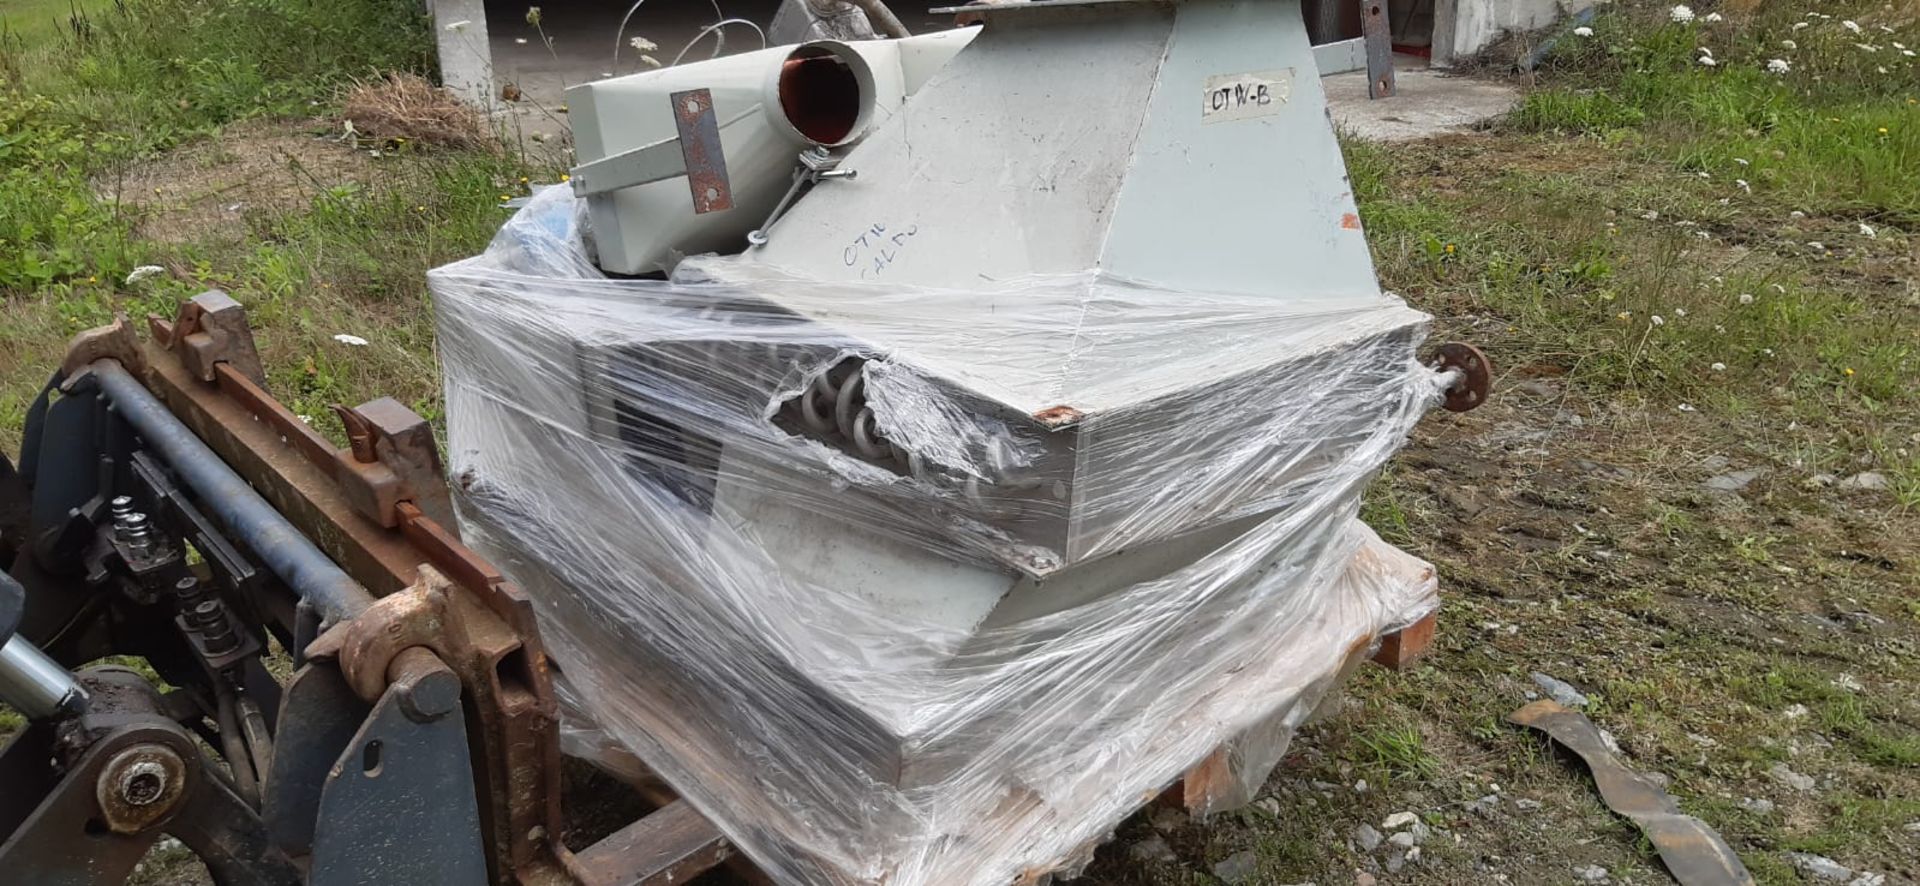 Bed Dryer - Buhler OTW 150 fluid bed dryer/cooler, new 1998 but never used. It can be used to dry or - Image 9 of 11